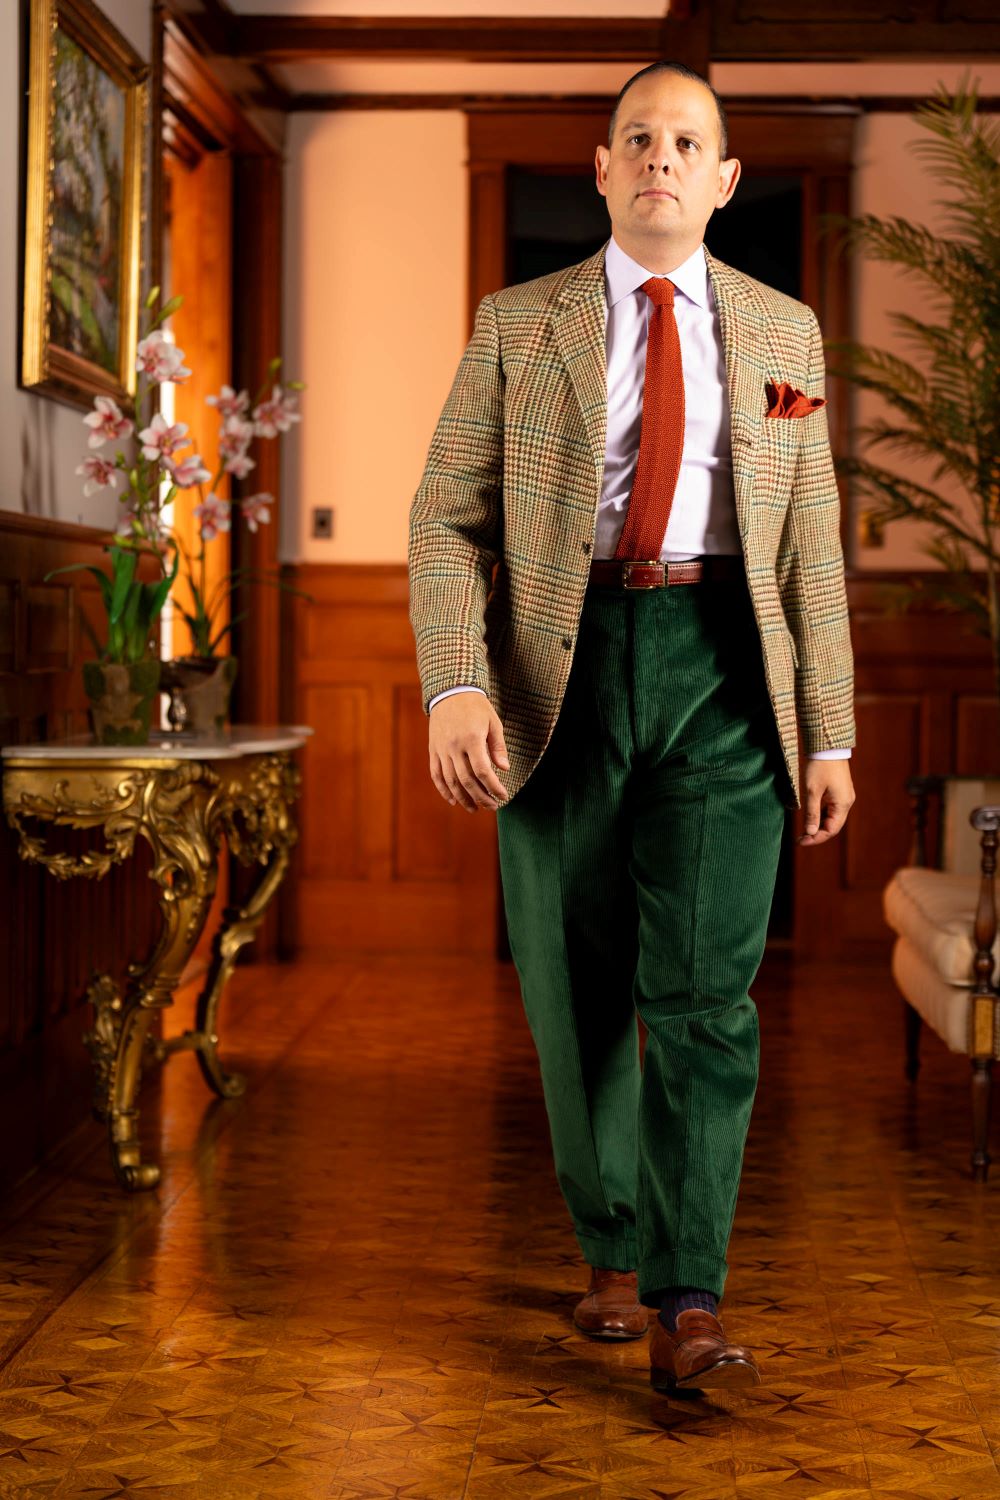 Sven Raphael Schneider modelling the Stancliffe Corduroy trousers in British Racing Green with a bold Prince of Wales Check Tweed Sport coat and orange knit tie and wool challis pocket square in orange with green Polka dots